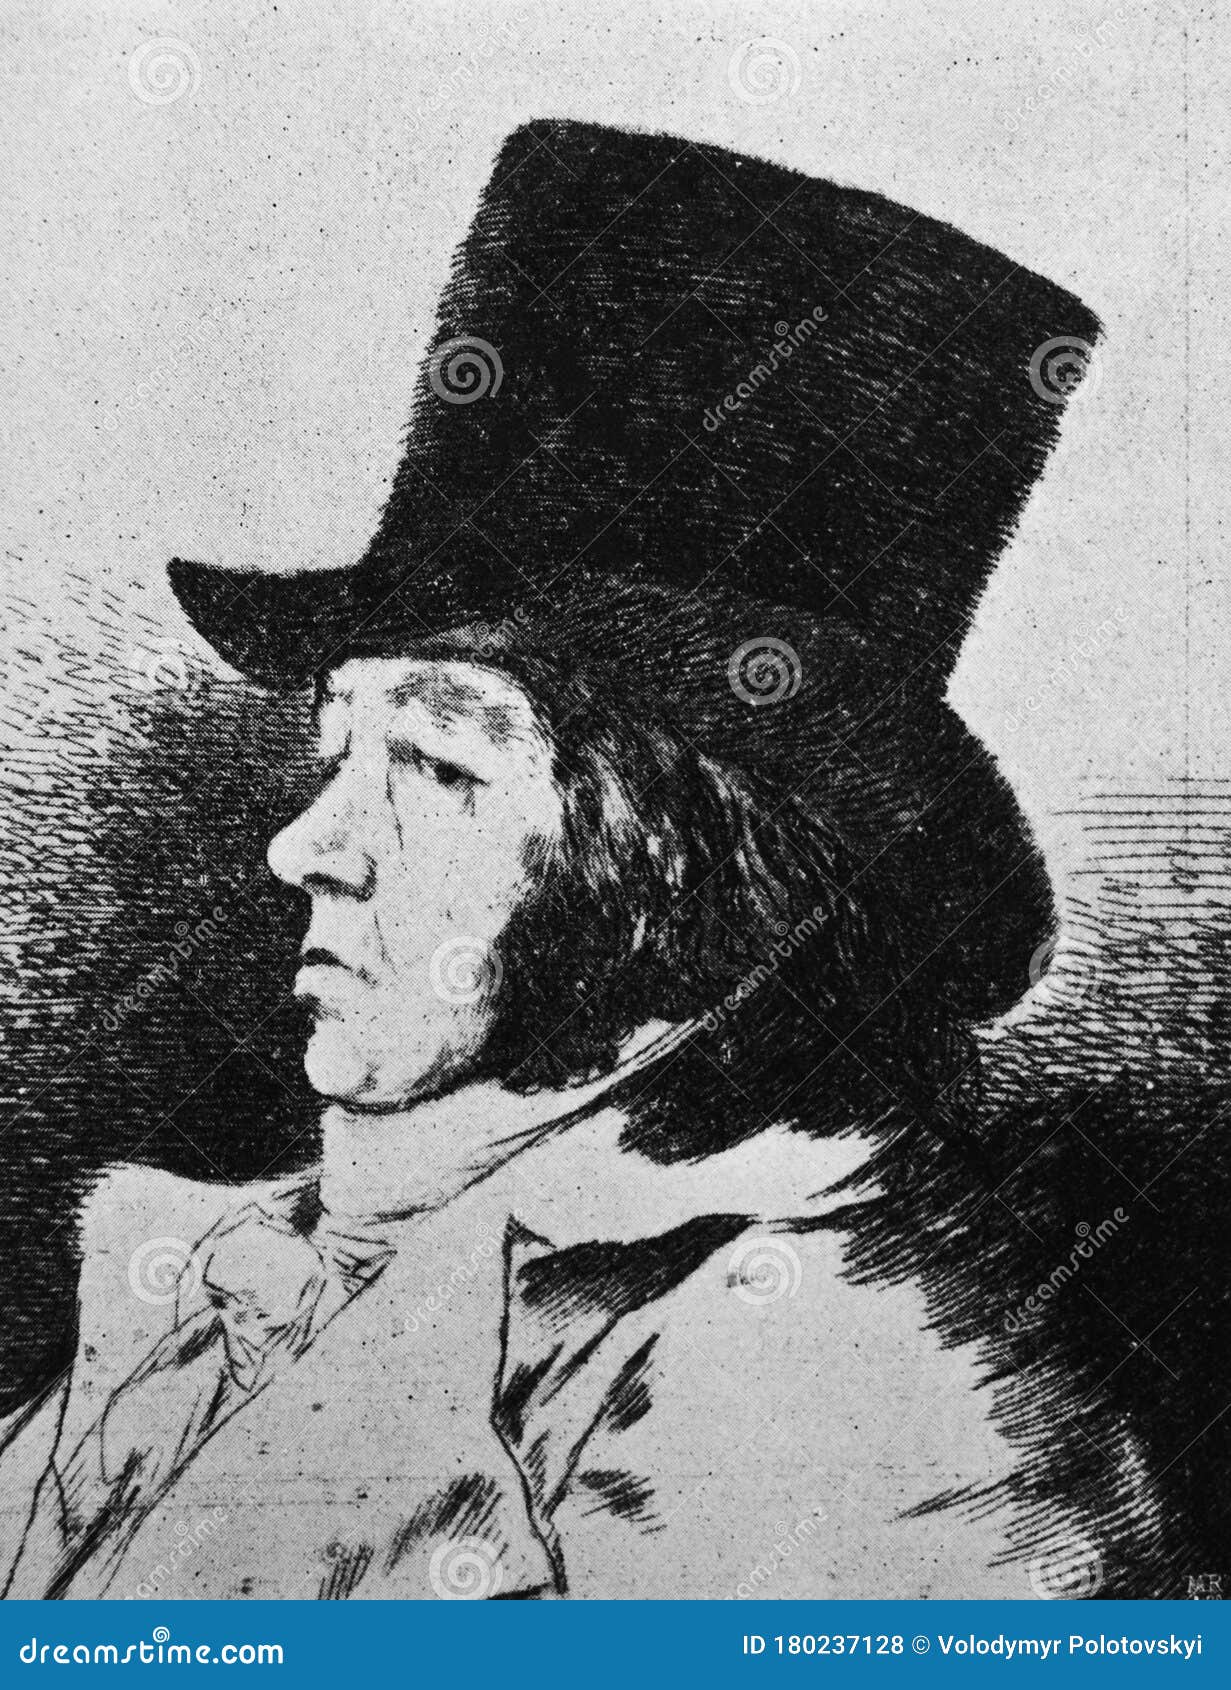 the francisco goya`s portrait, a spanish romantic painter and printmaker in the old book the history of painting, by r. muter,